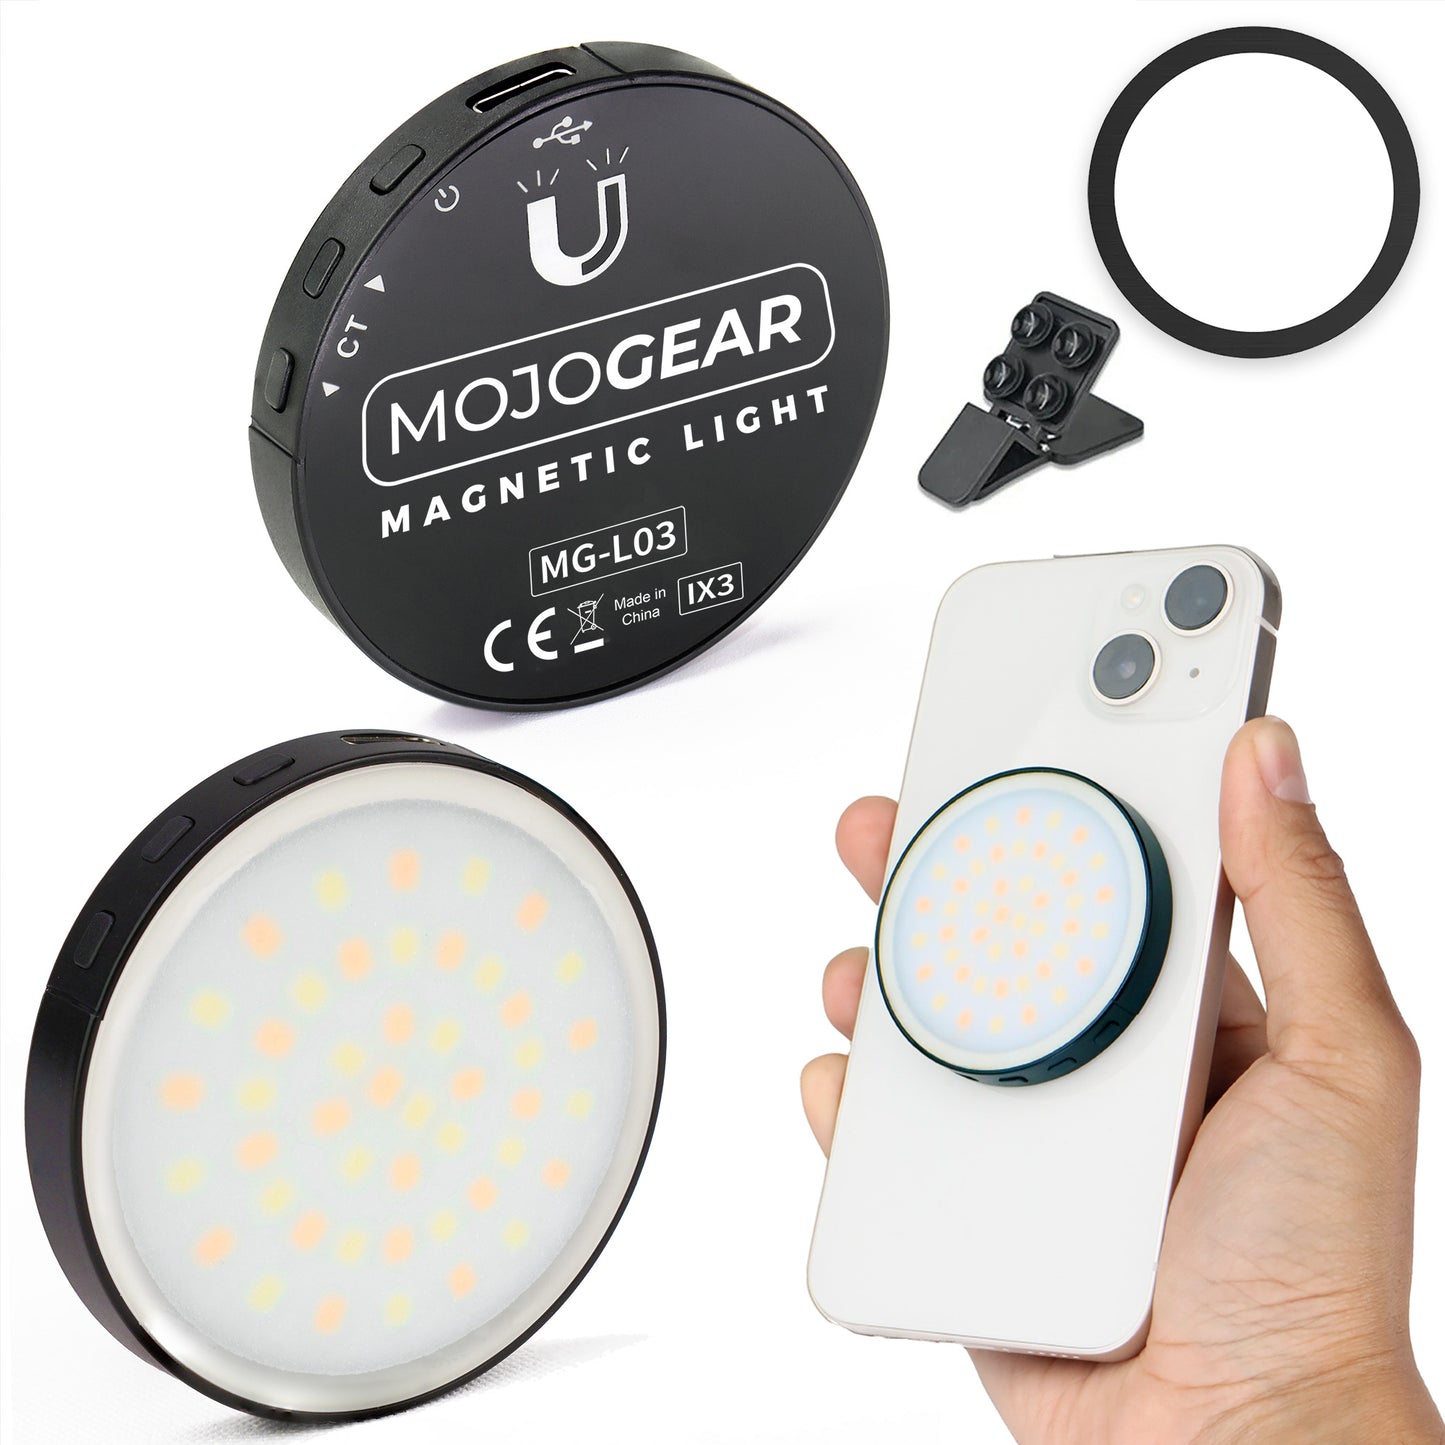 MOJOGEAR Magnetic Mini Video Light for MagSafe